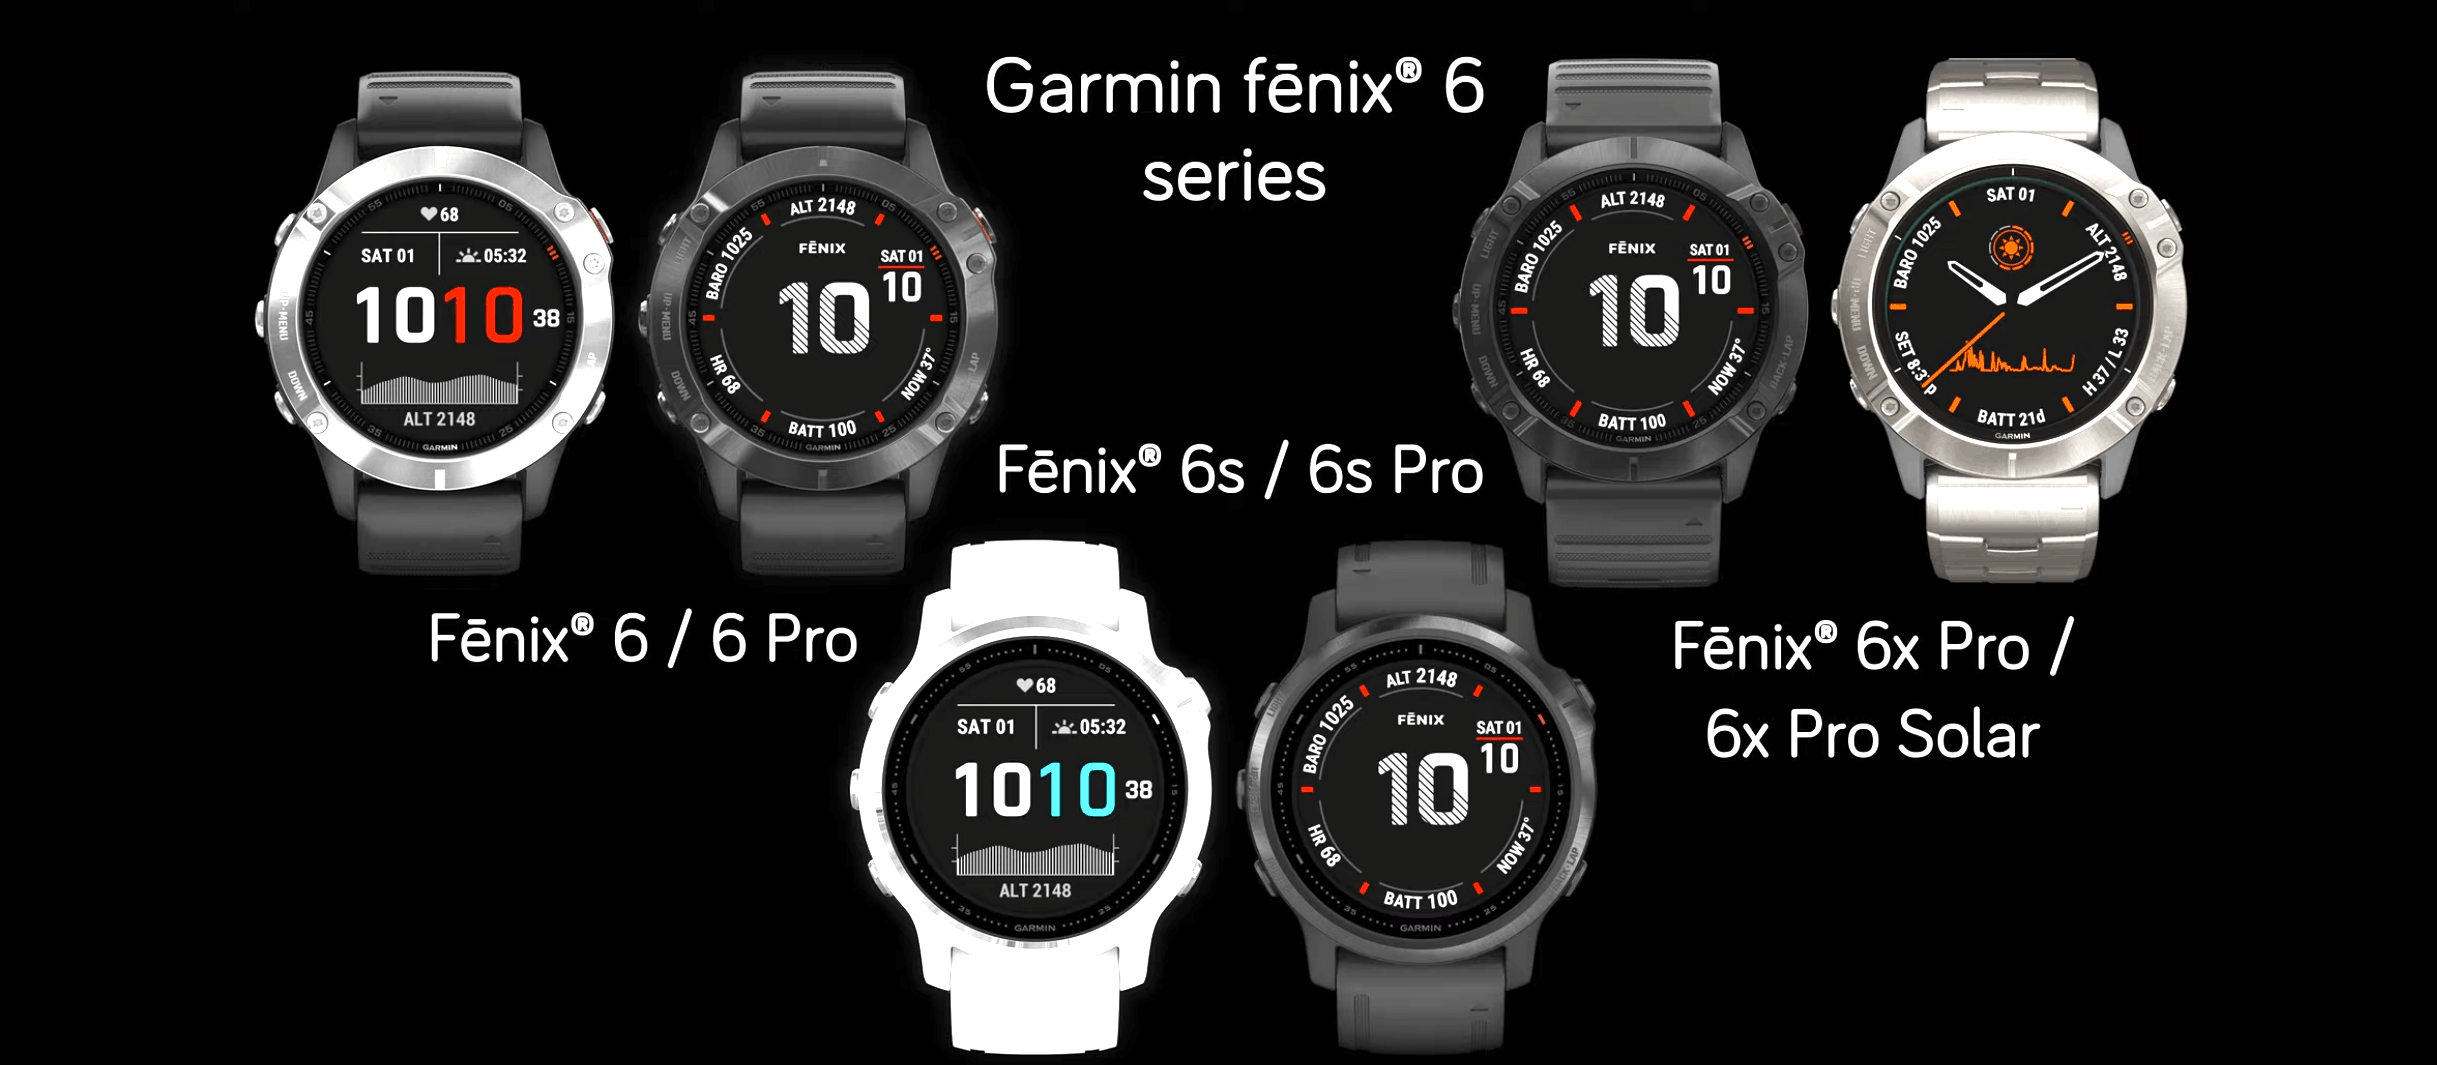 Garmin Fenix 6 Series Leaked includes Pro model and 6x Pro Solar – Key features revealed